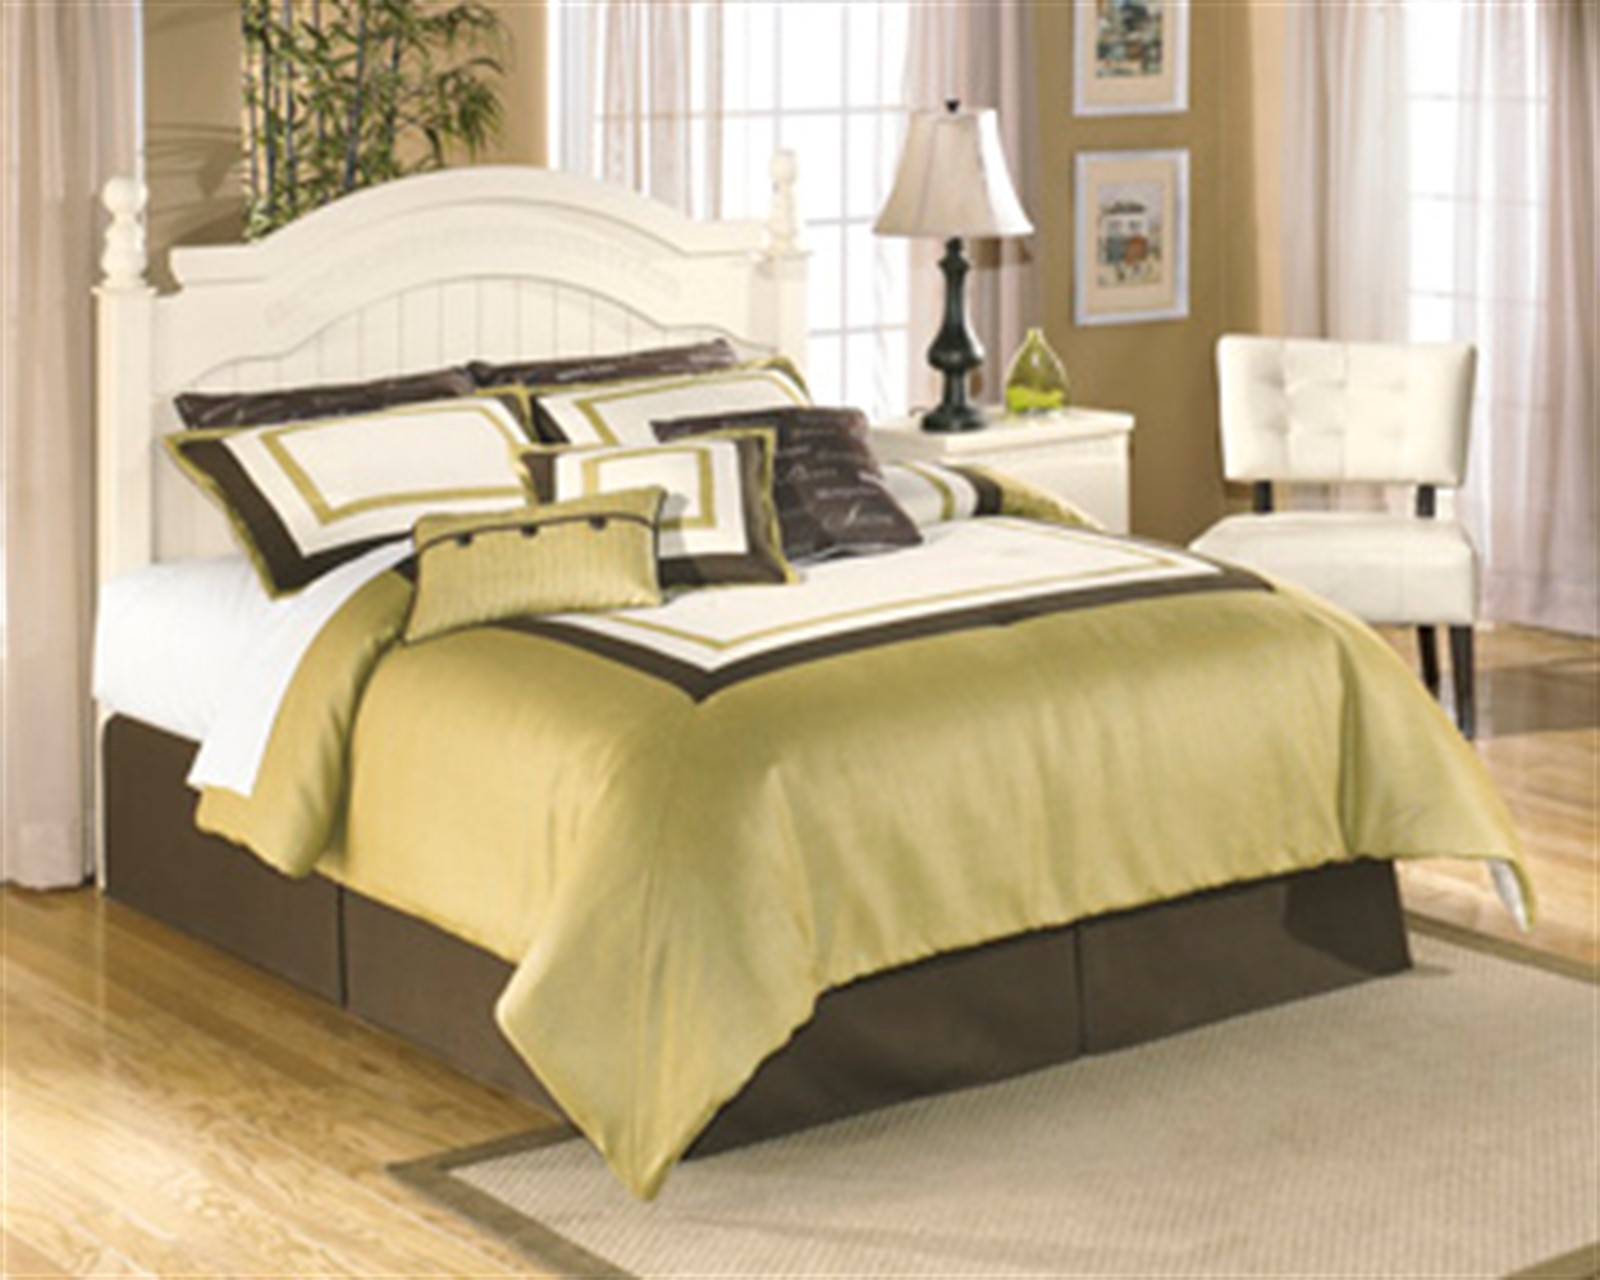 Signature Design By Ashley Cottage Retreat Cream Queen Poster Bed